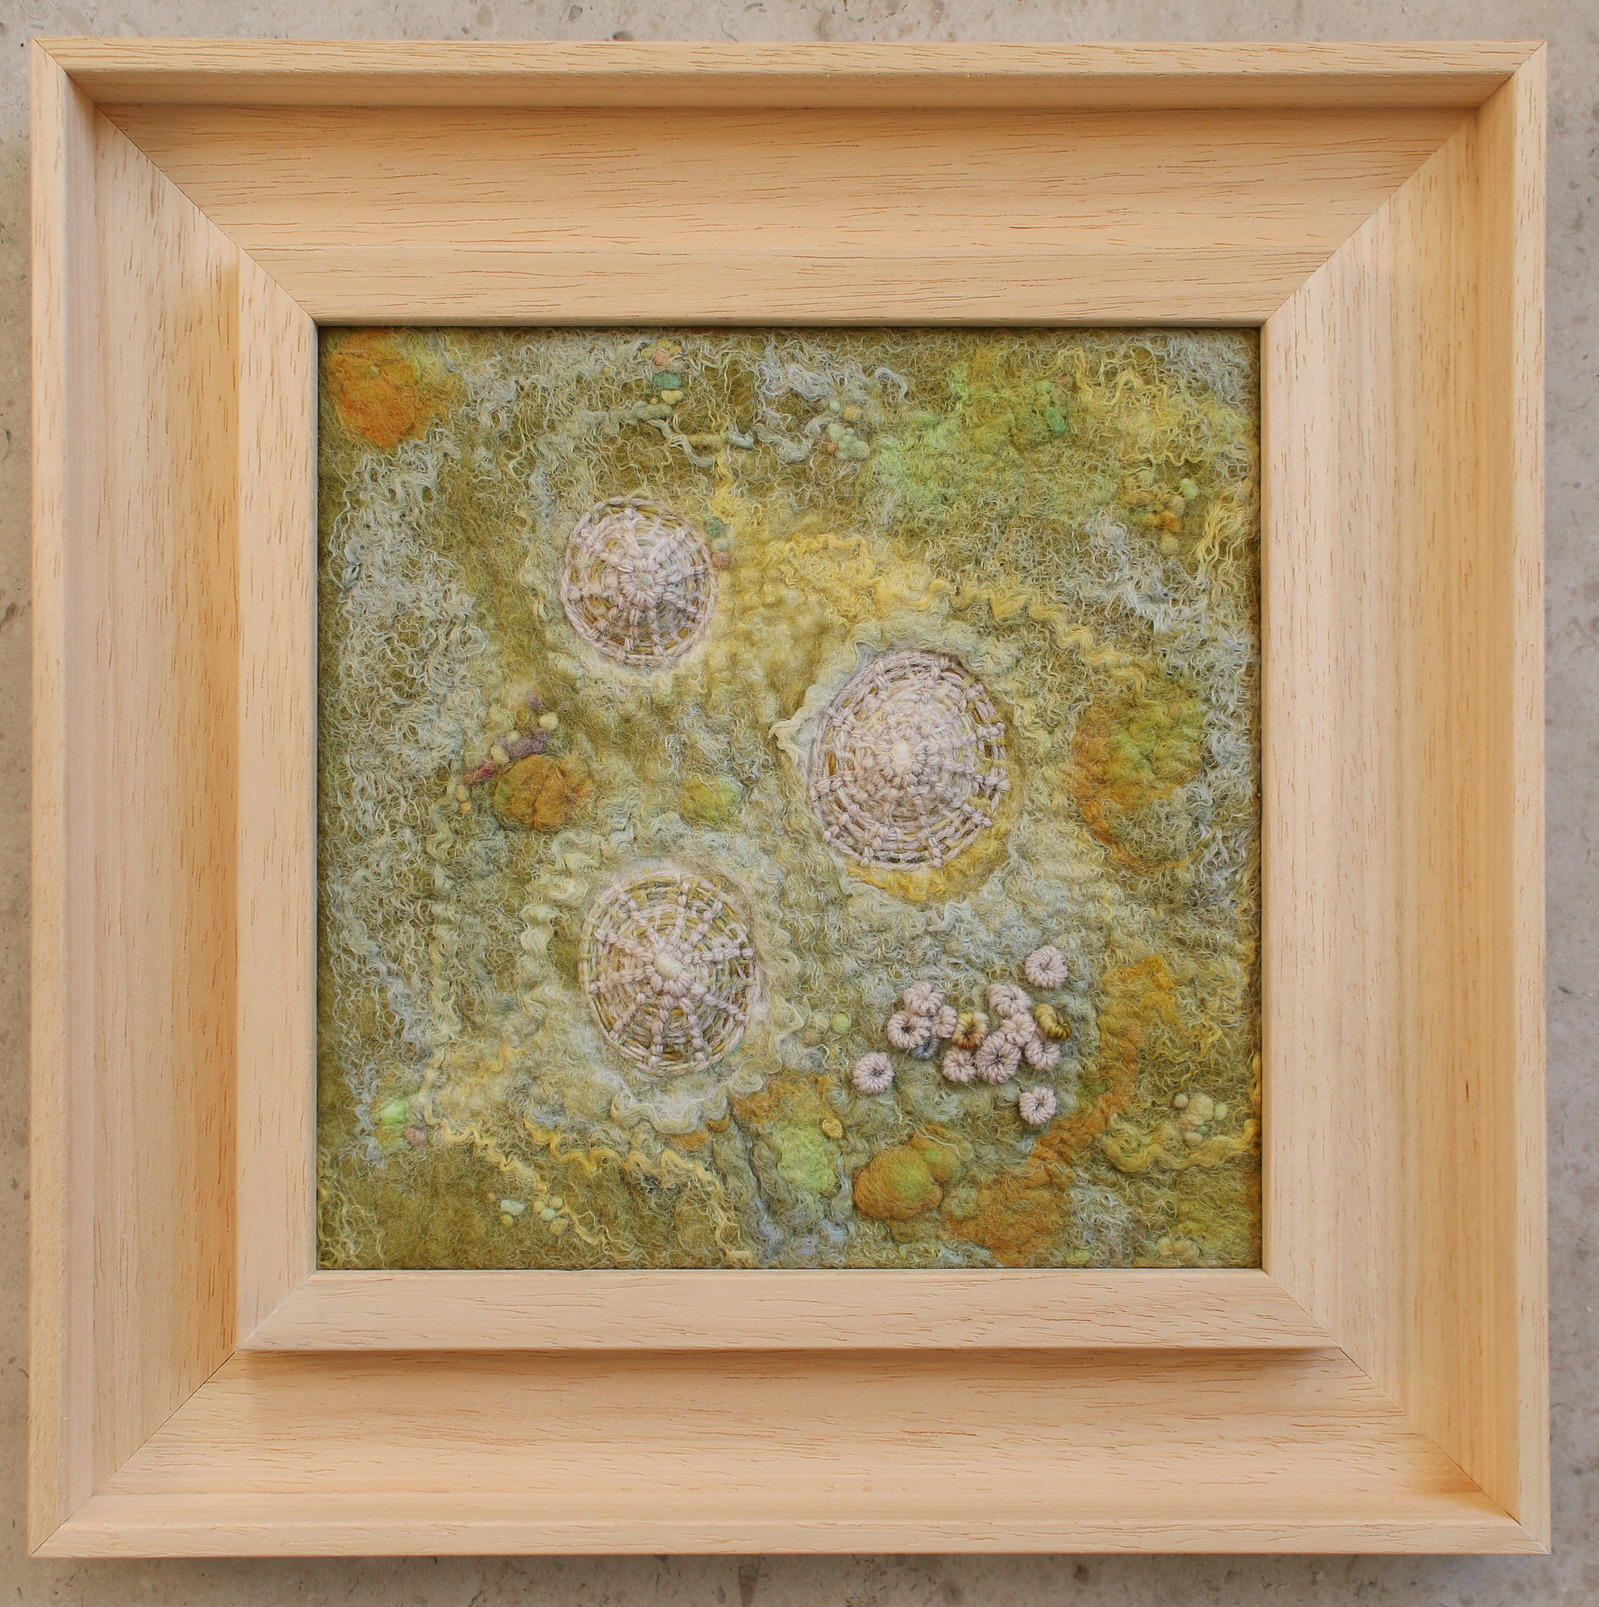 Textured felt artwork depicting limpet shells with hand embroidery by Lynn Comley a Yorkshire based textile artist